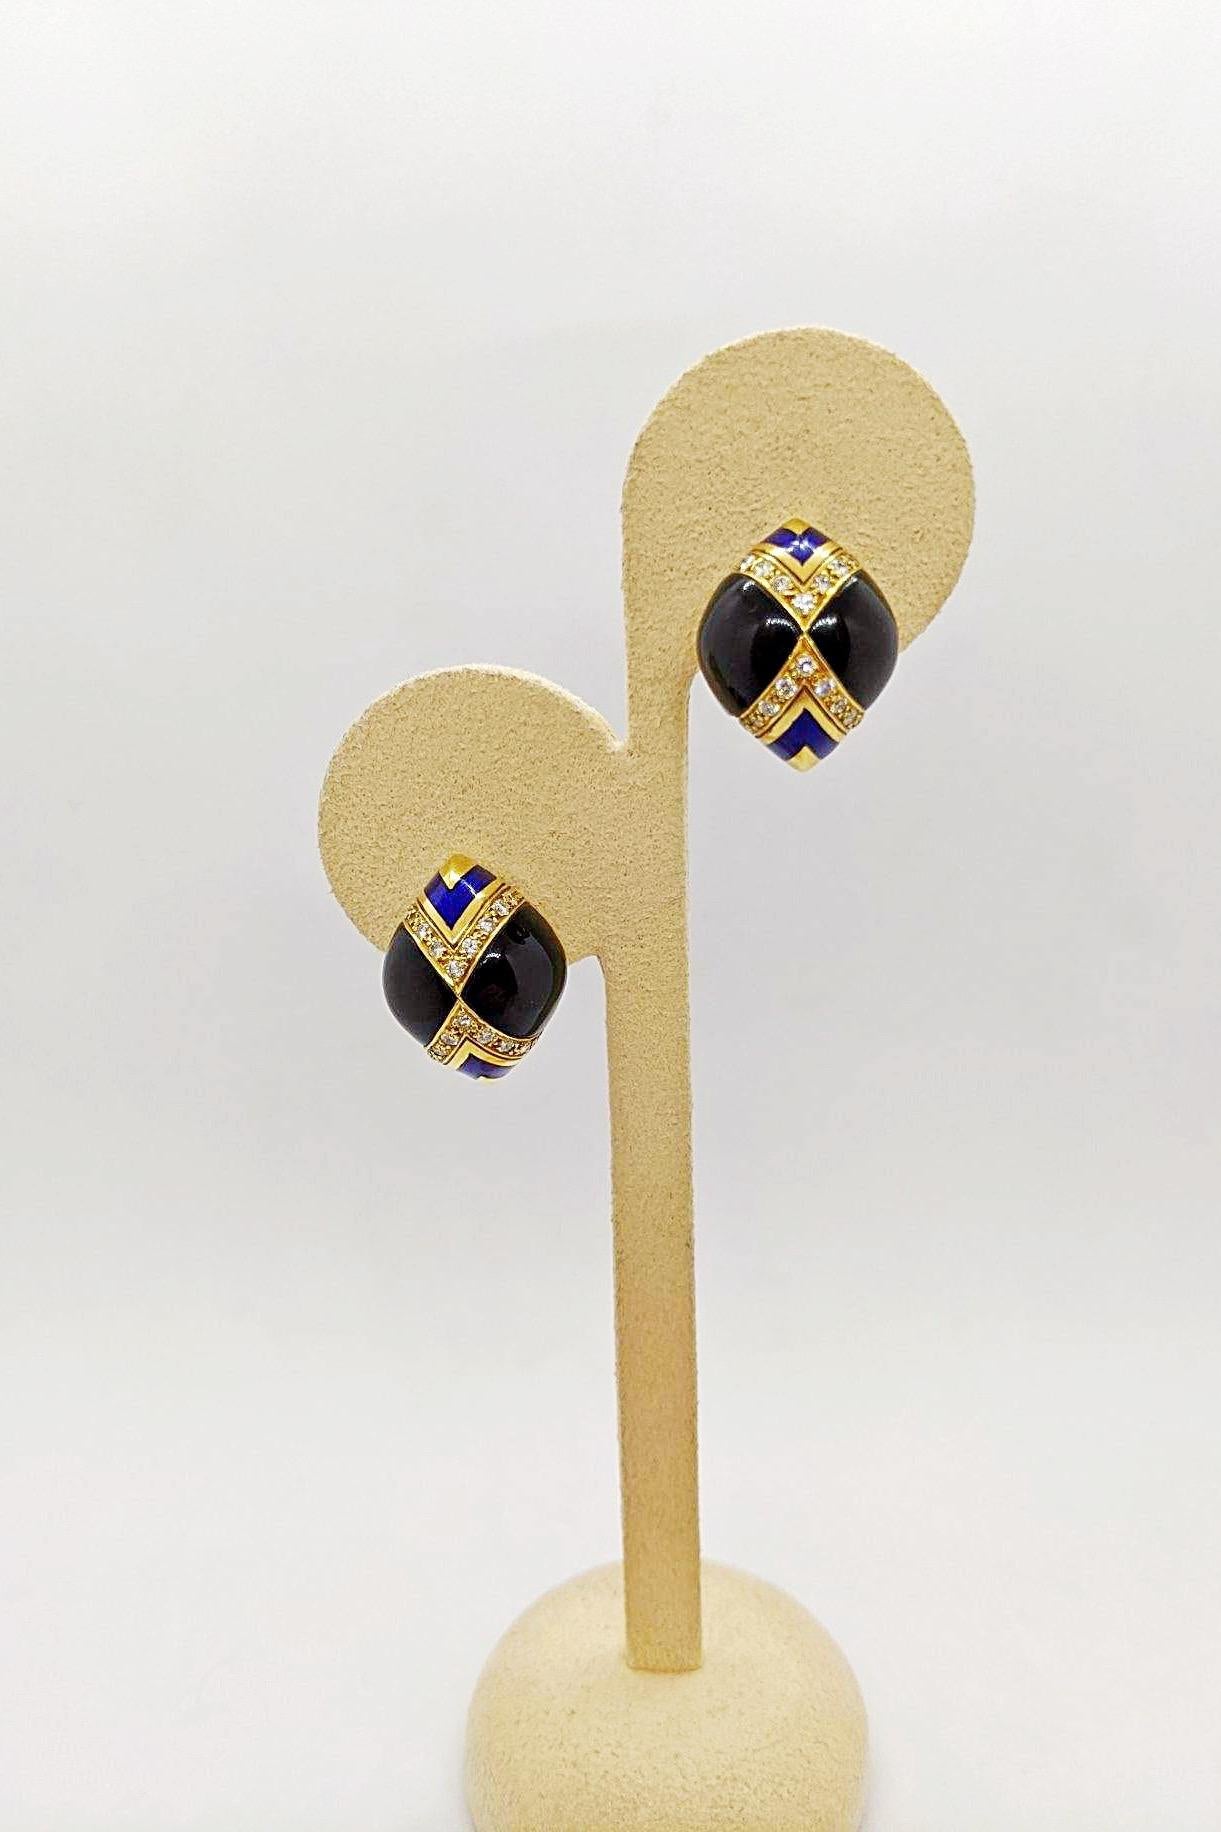 One pair of 18 karat yellow gold earrings set with a combination of Black Onyx, Blue Enamel and Diamonds. The earrings have a post back and a clip, but can be adjusted for non pierced ears. The oval shaped earring measures 3/4